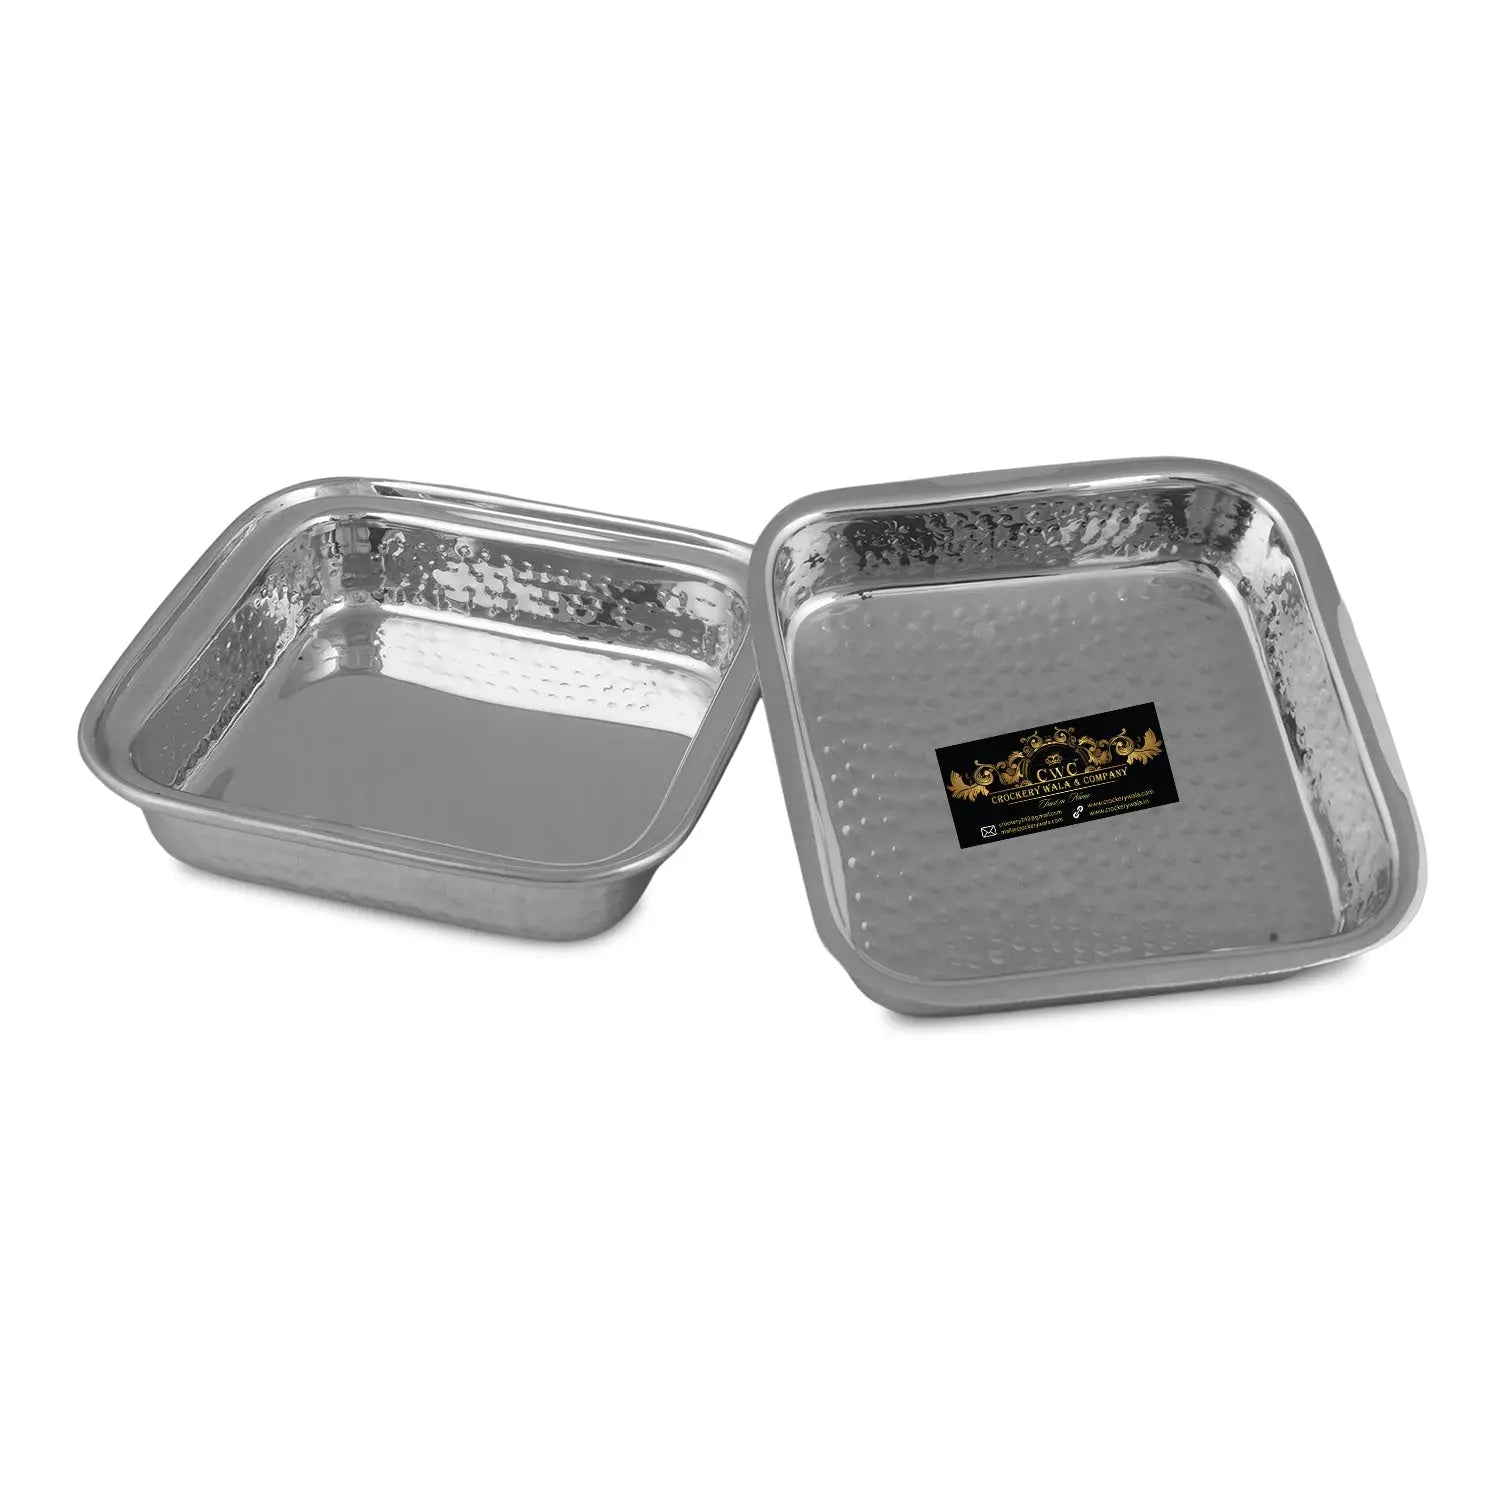 Crockery Wala And Company Stainless Steel Entry Dish Hammered Design Square Snacks Serving Dish With Lid-Small - CROCKERY WALA AND COMPANY 